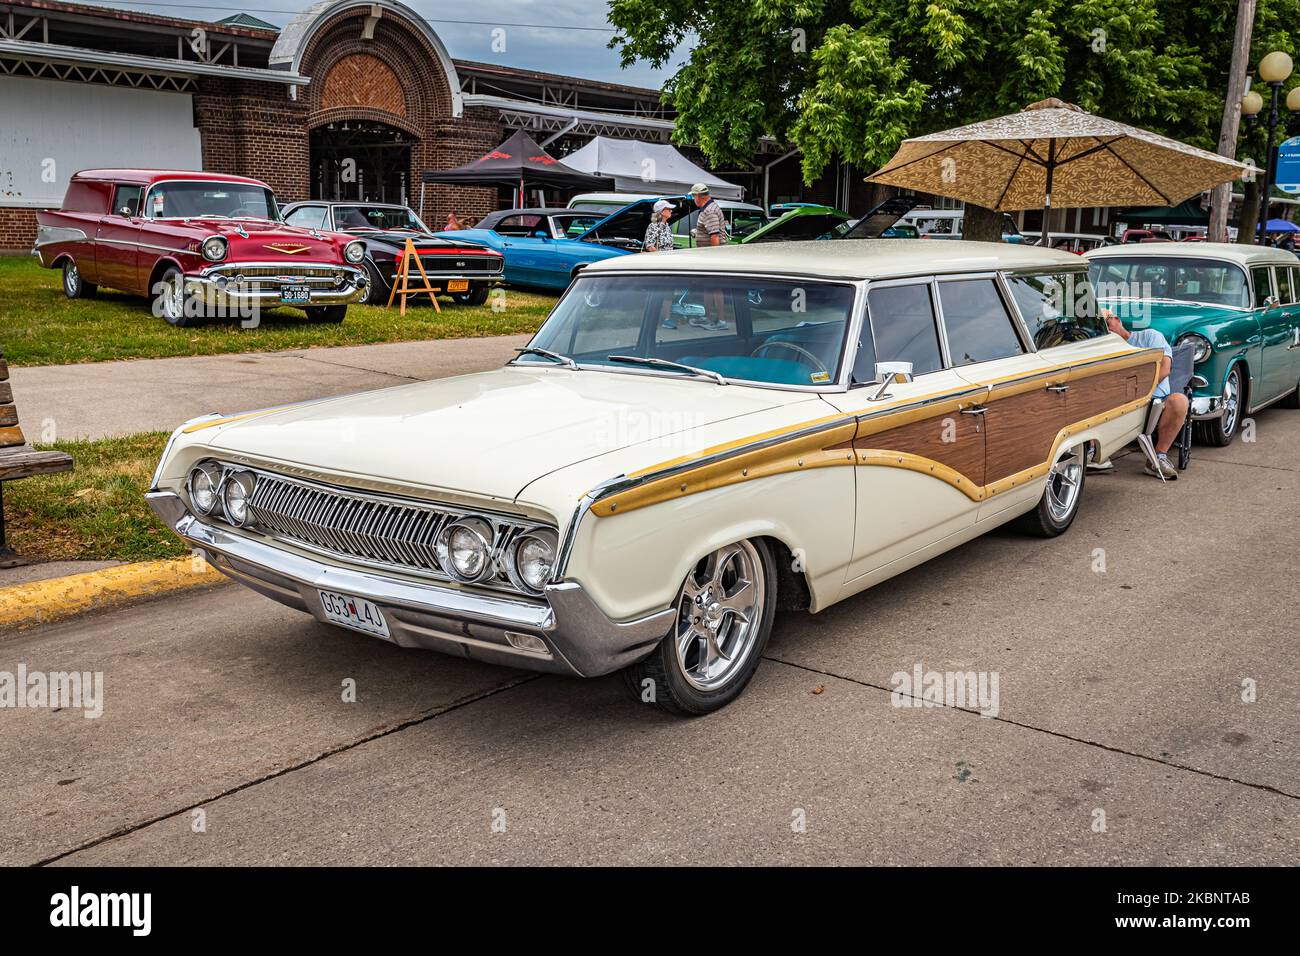 Des Moines, IA - July 01, 2022: High perspective front corner view of a 1964 Mercury Colony Park Station Wagon at a local car show. Stock Photo